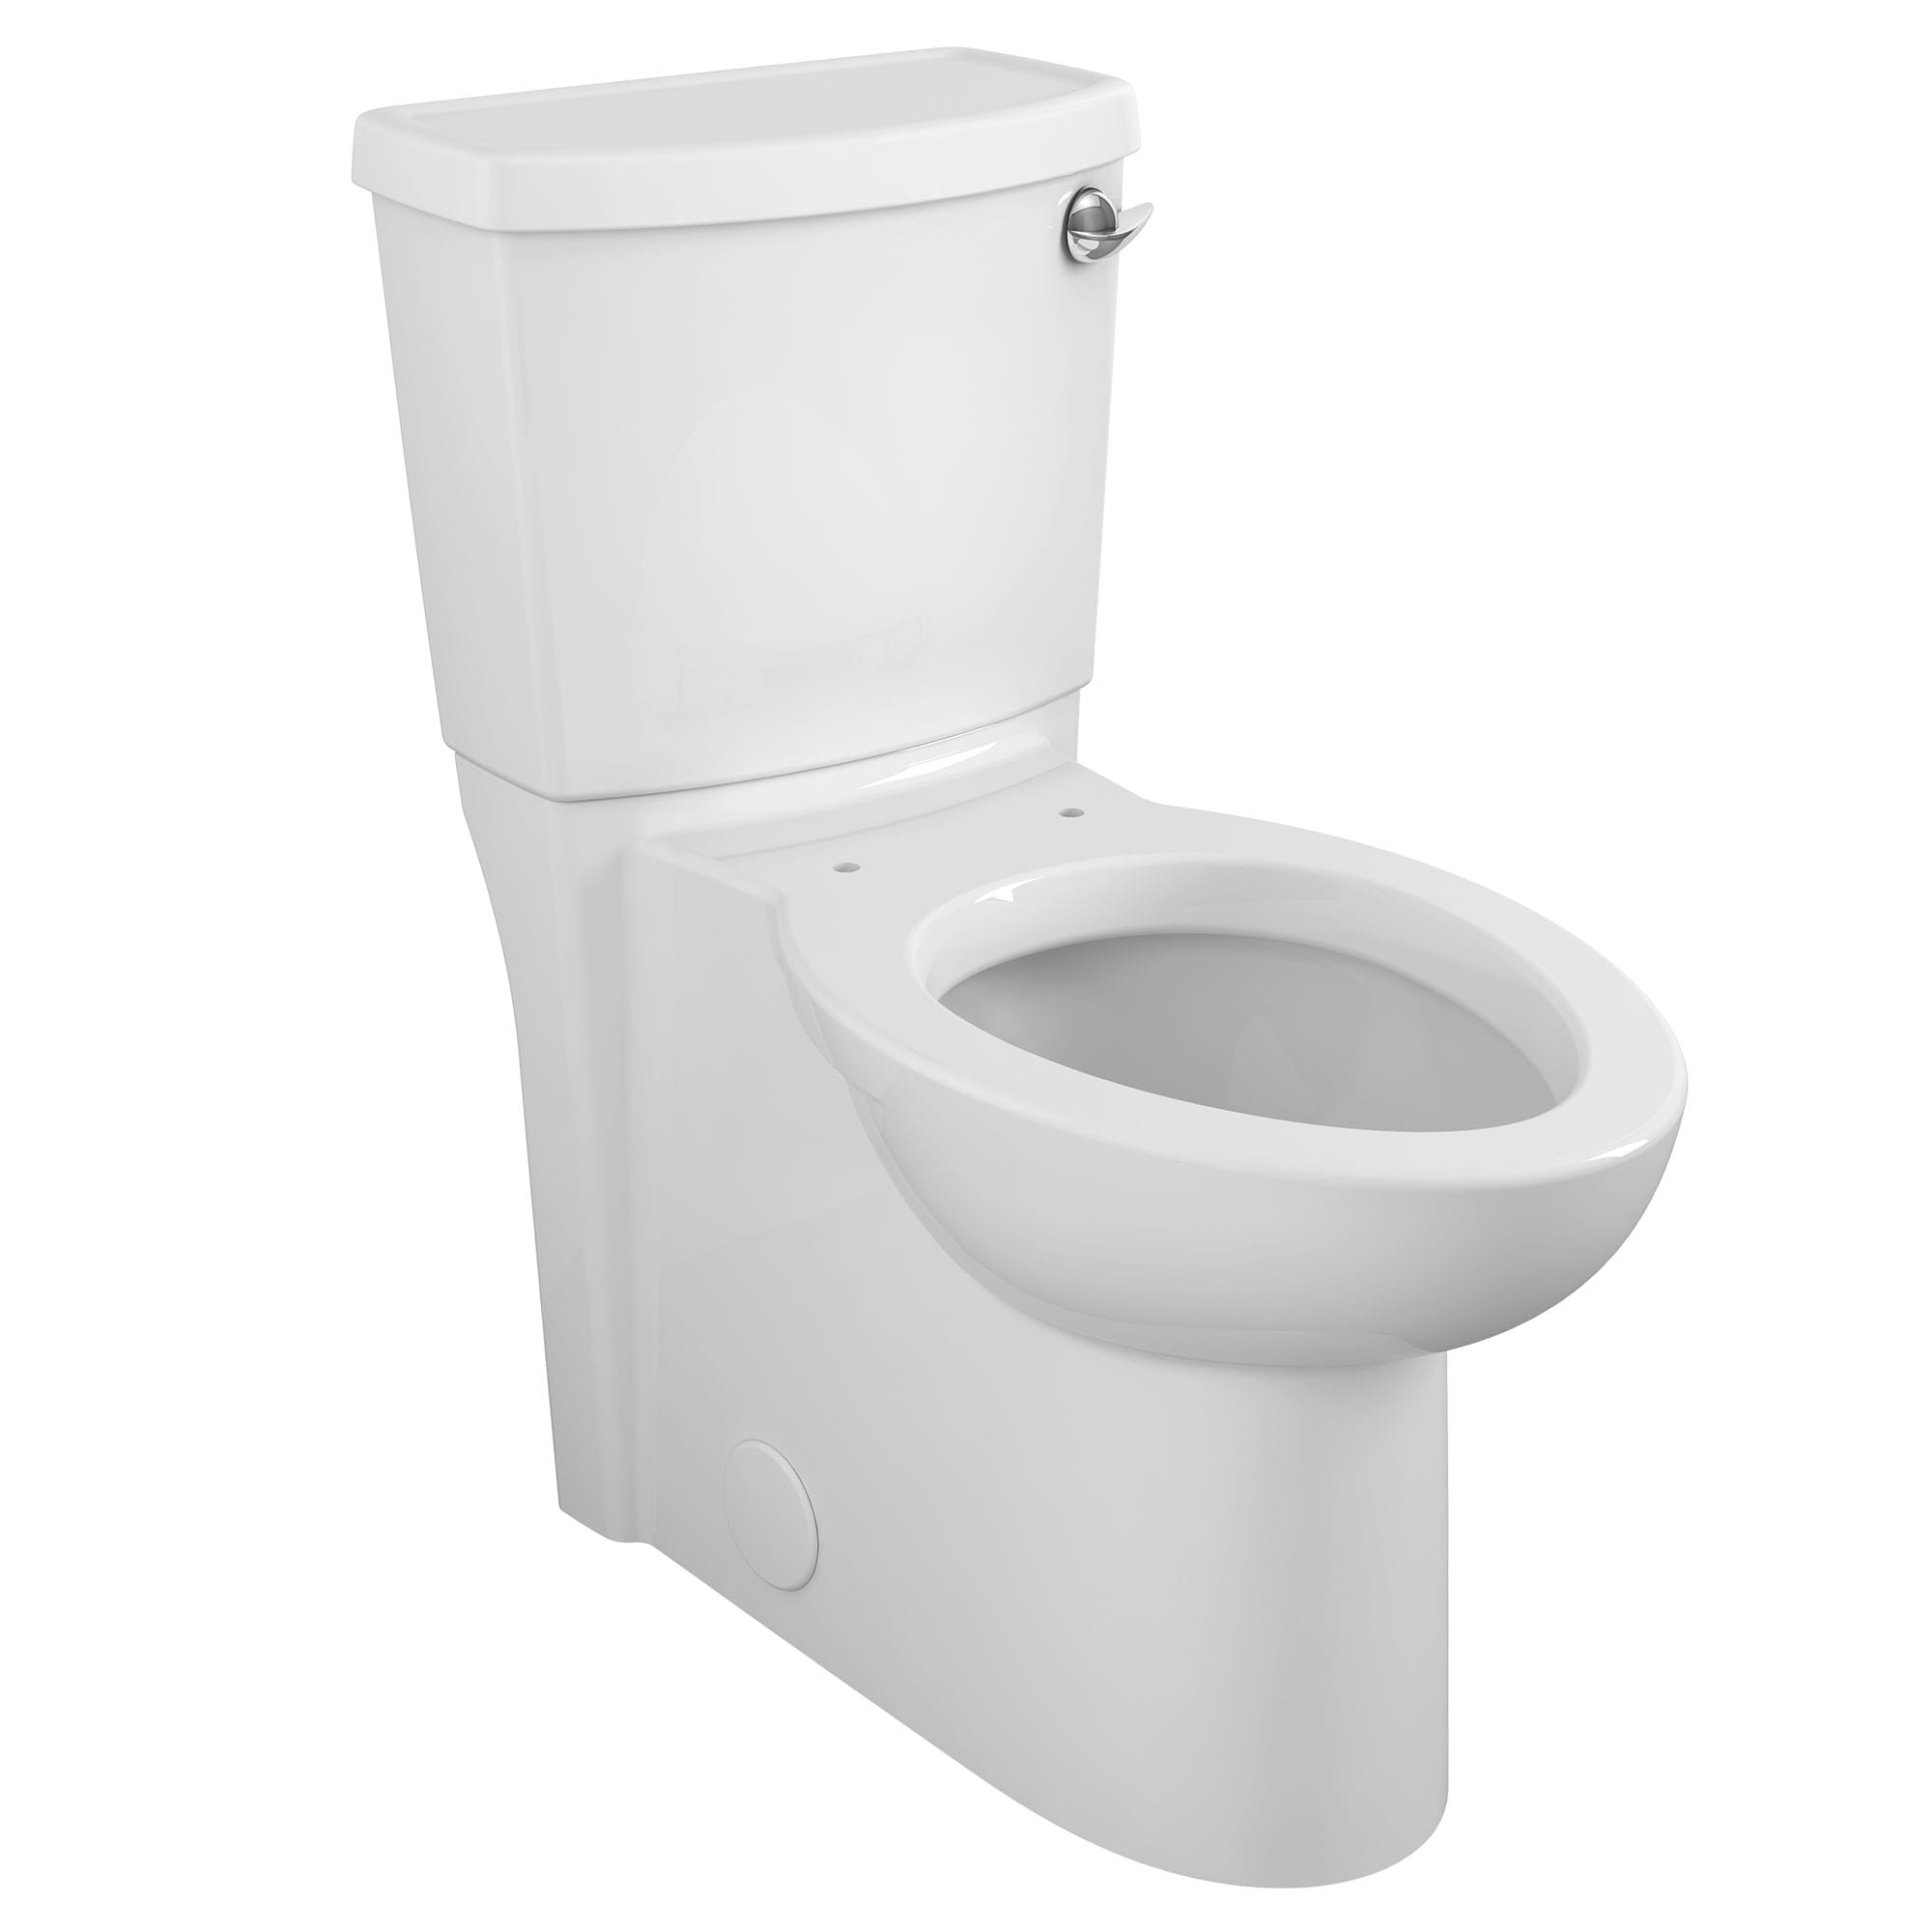 Cadet® 3 FloWise® Skirted Two-Piece 1.28 gpf/4.8 Lpf Chair Height Right-Hand Trip Lever Elongated Toilet With Seat